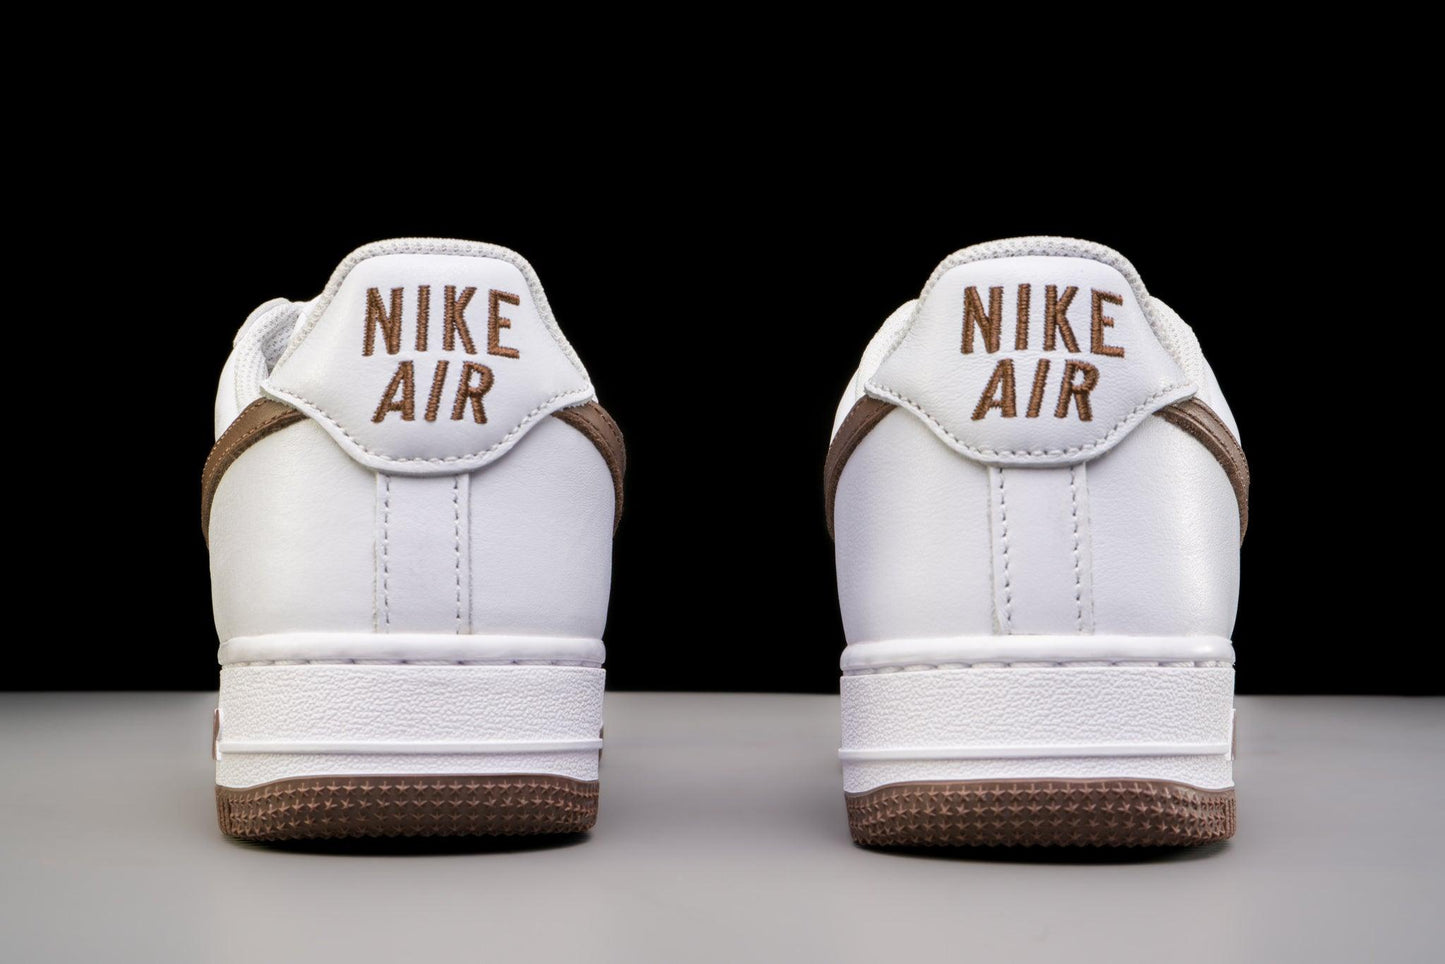 Nike Air Force 1 '07 Low Color of the Month White Chocolate (2022) - Lo10M